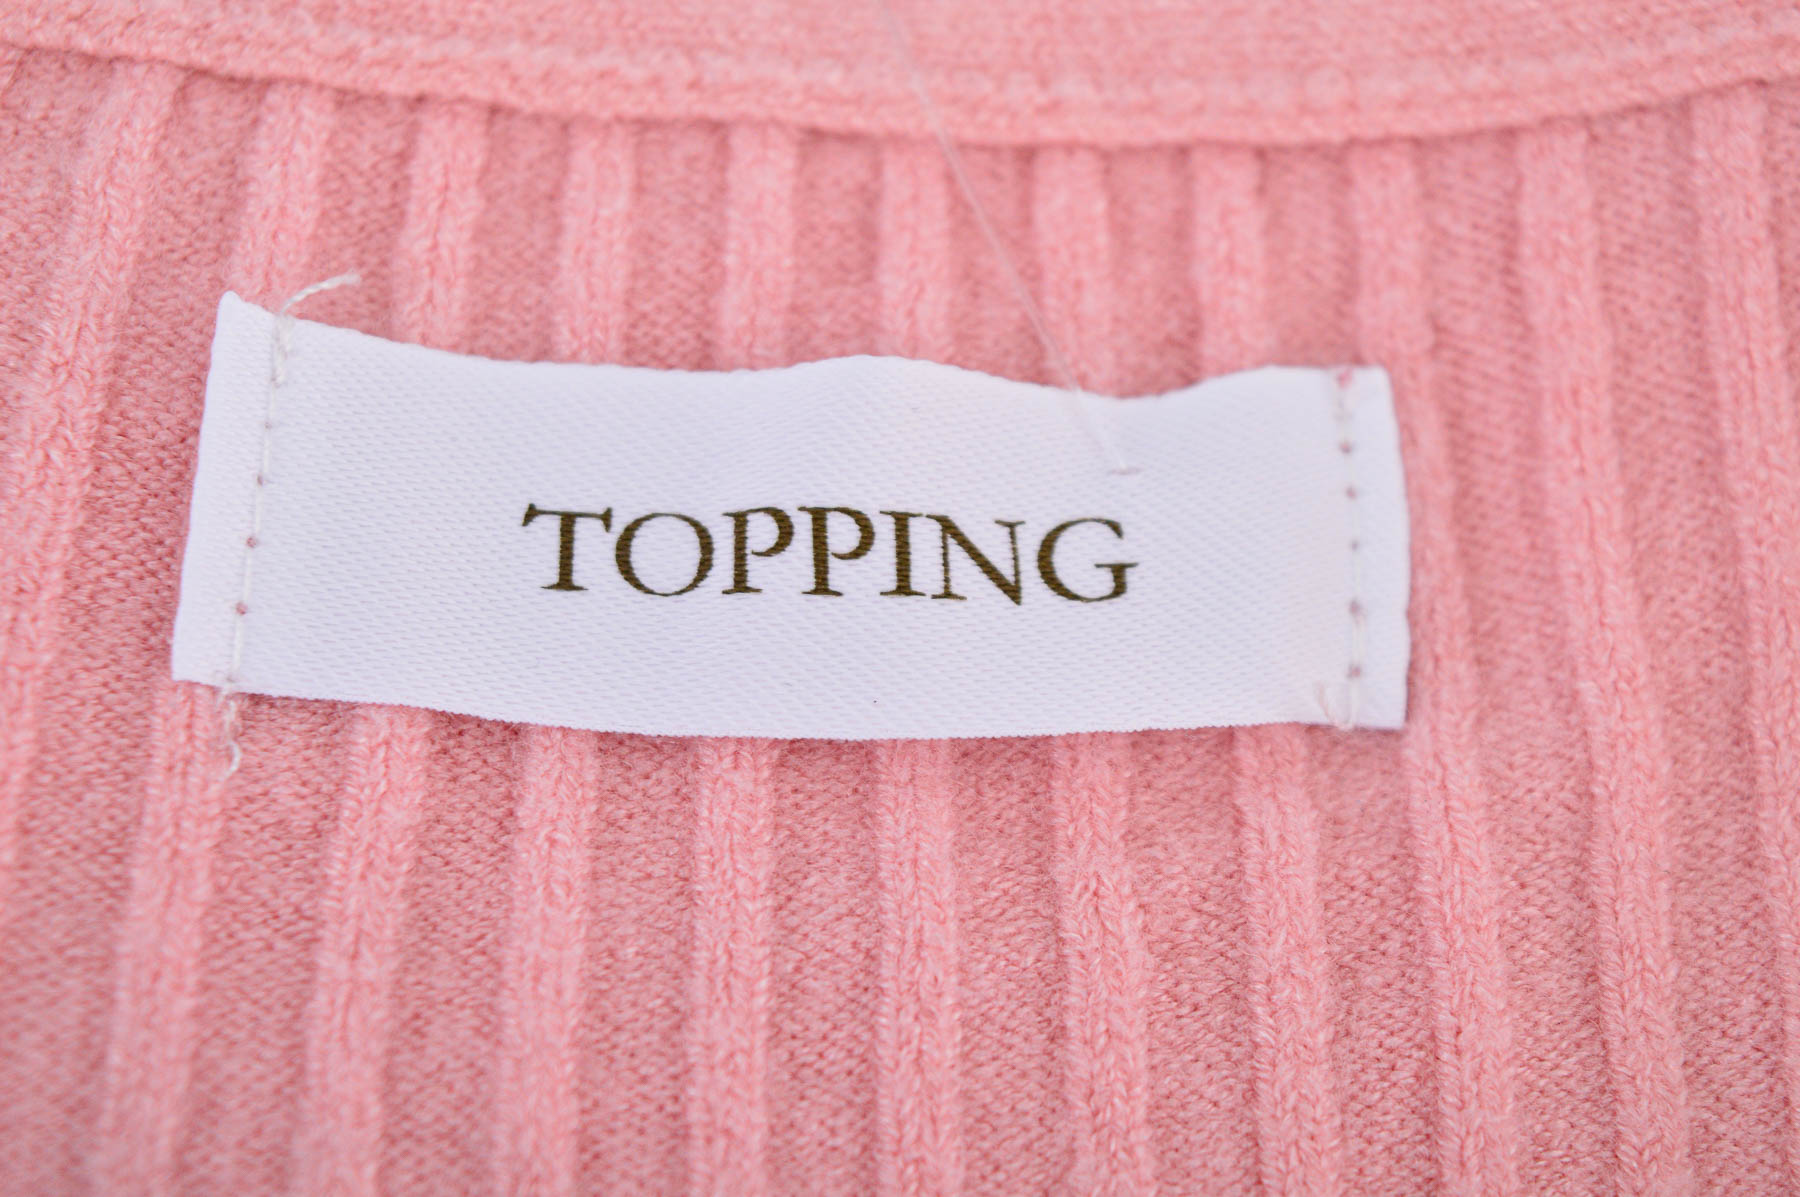 Women's sweater - Topping - 2